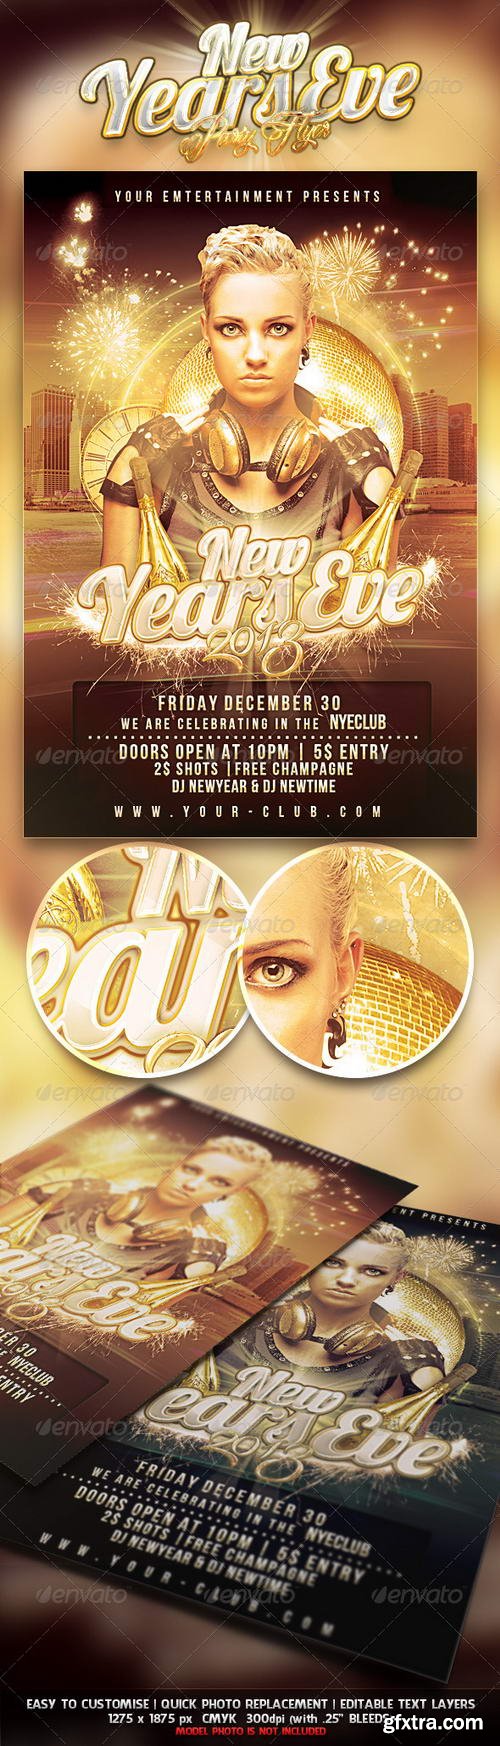 GraphicRiver - New Years Eve Party Flyer 3526475